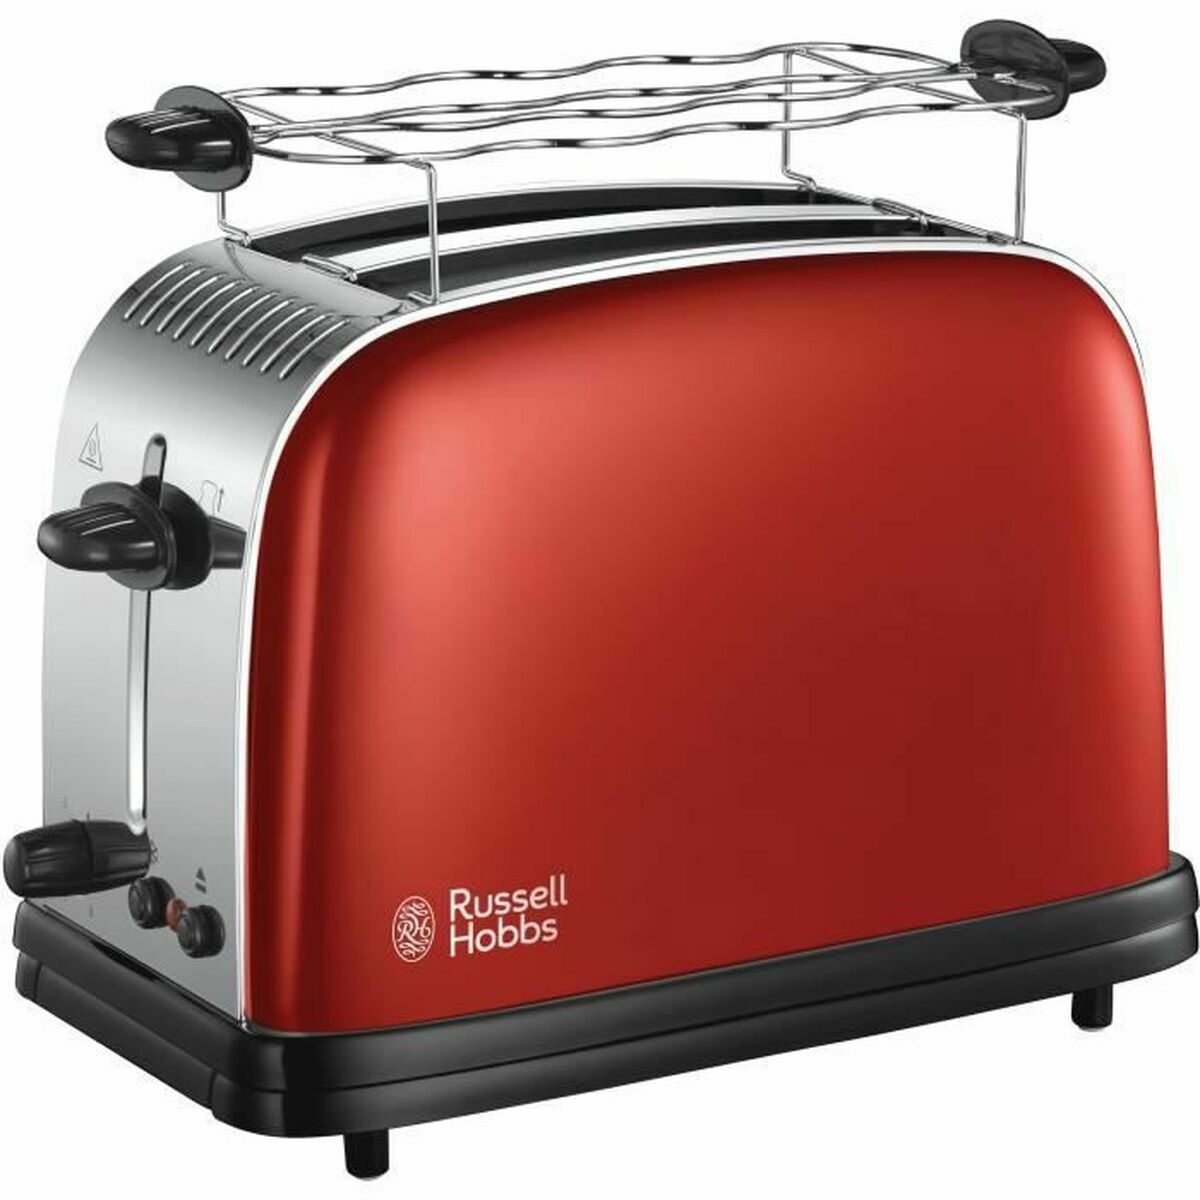 Toaster Russell Hobbs Colours Plus+ Flame Red 1670 W - CA International 